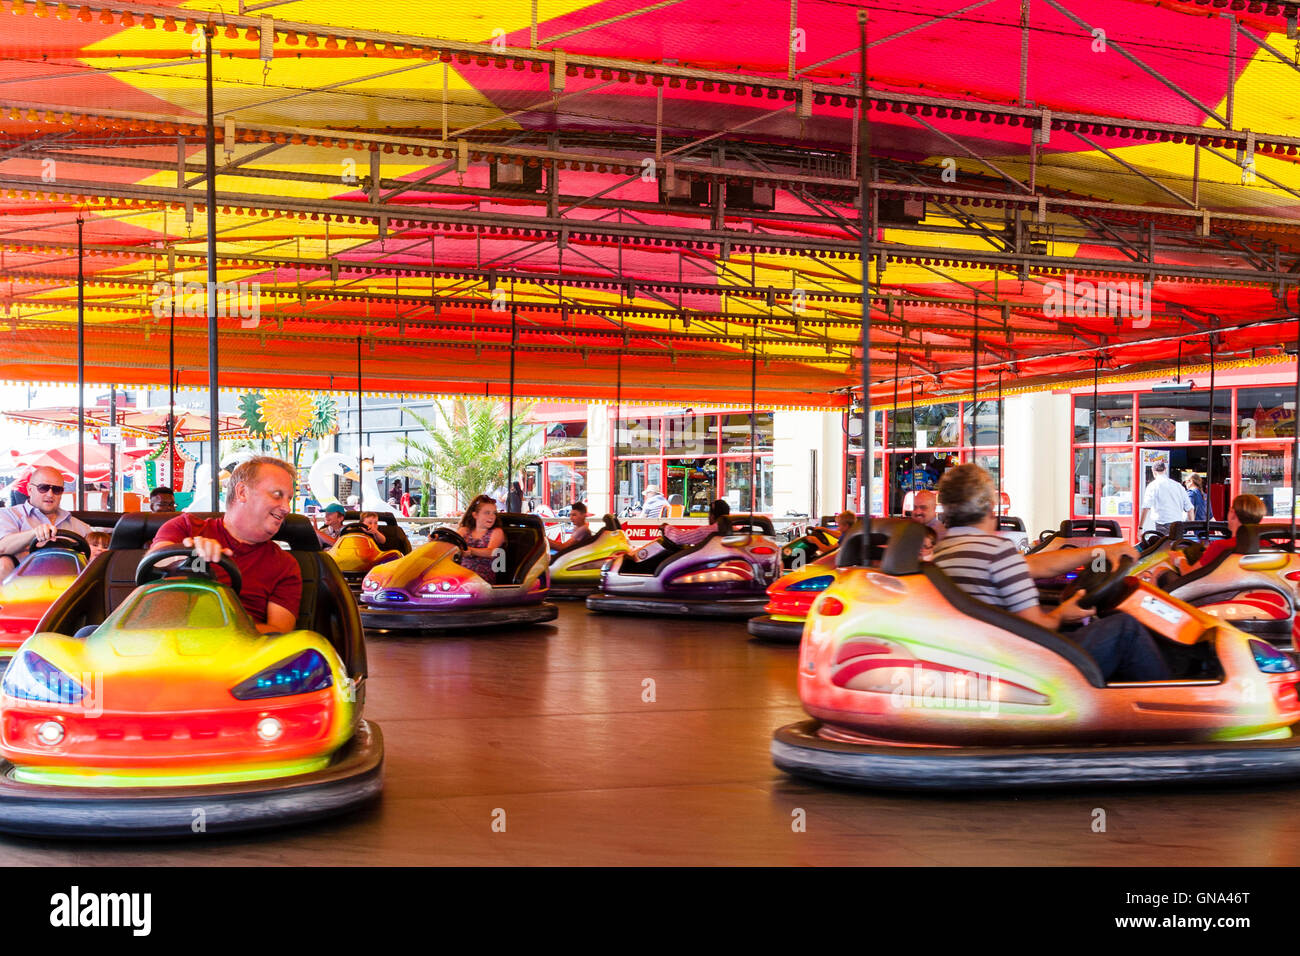 Dodgems, AKA  bumper cars, being driven around by adults and children at the seafront at Ramsgate, a Kent resort town, in the summertime. Stock Photo